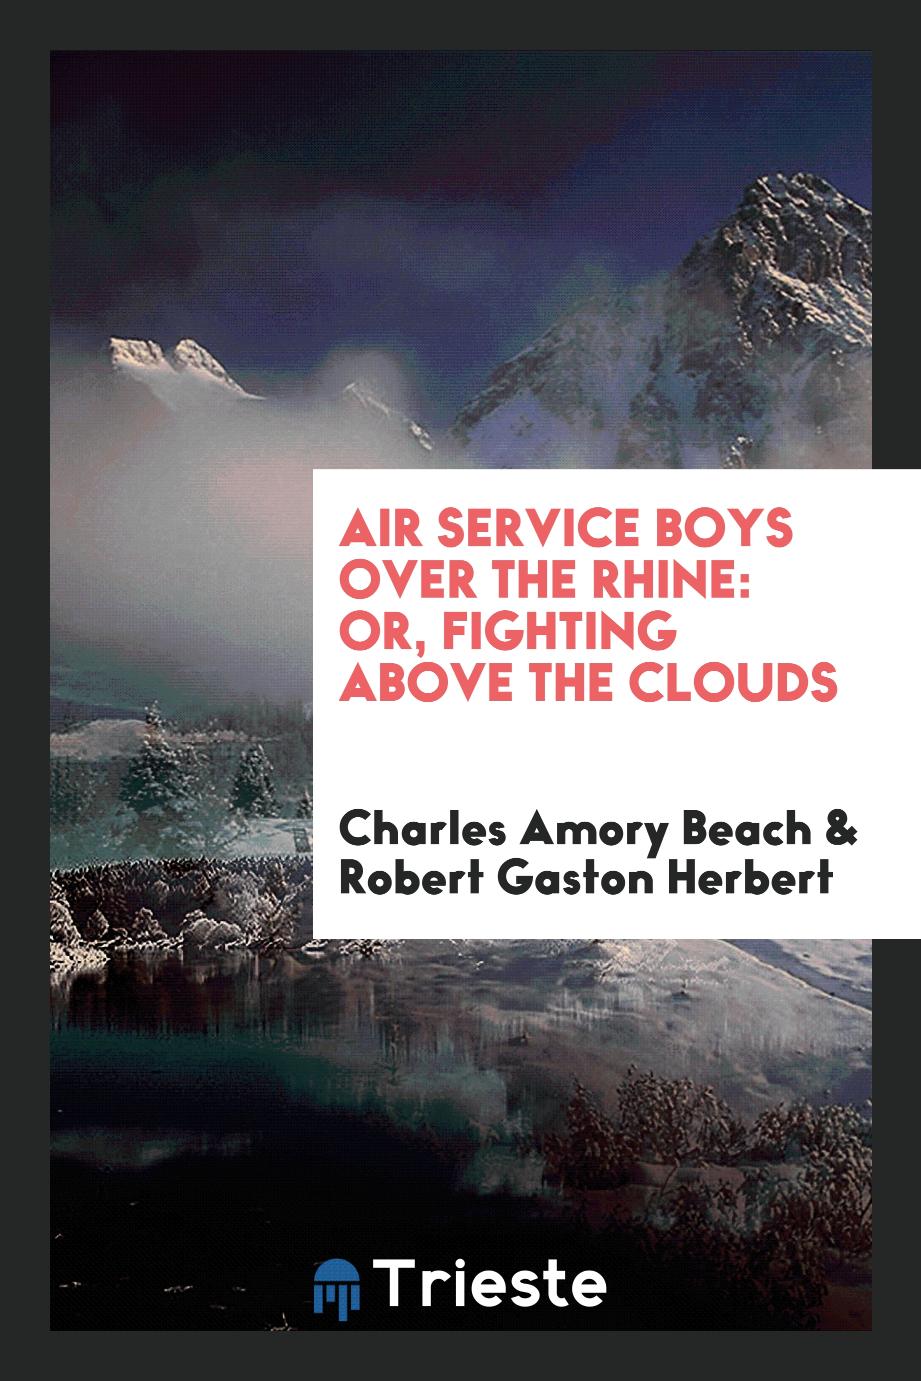 Air service boys over the Rhine: or, Fighting above the clouds